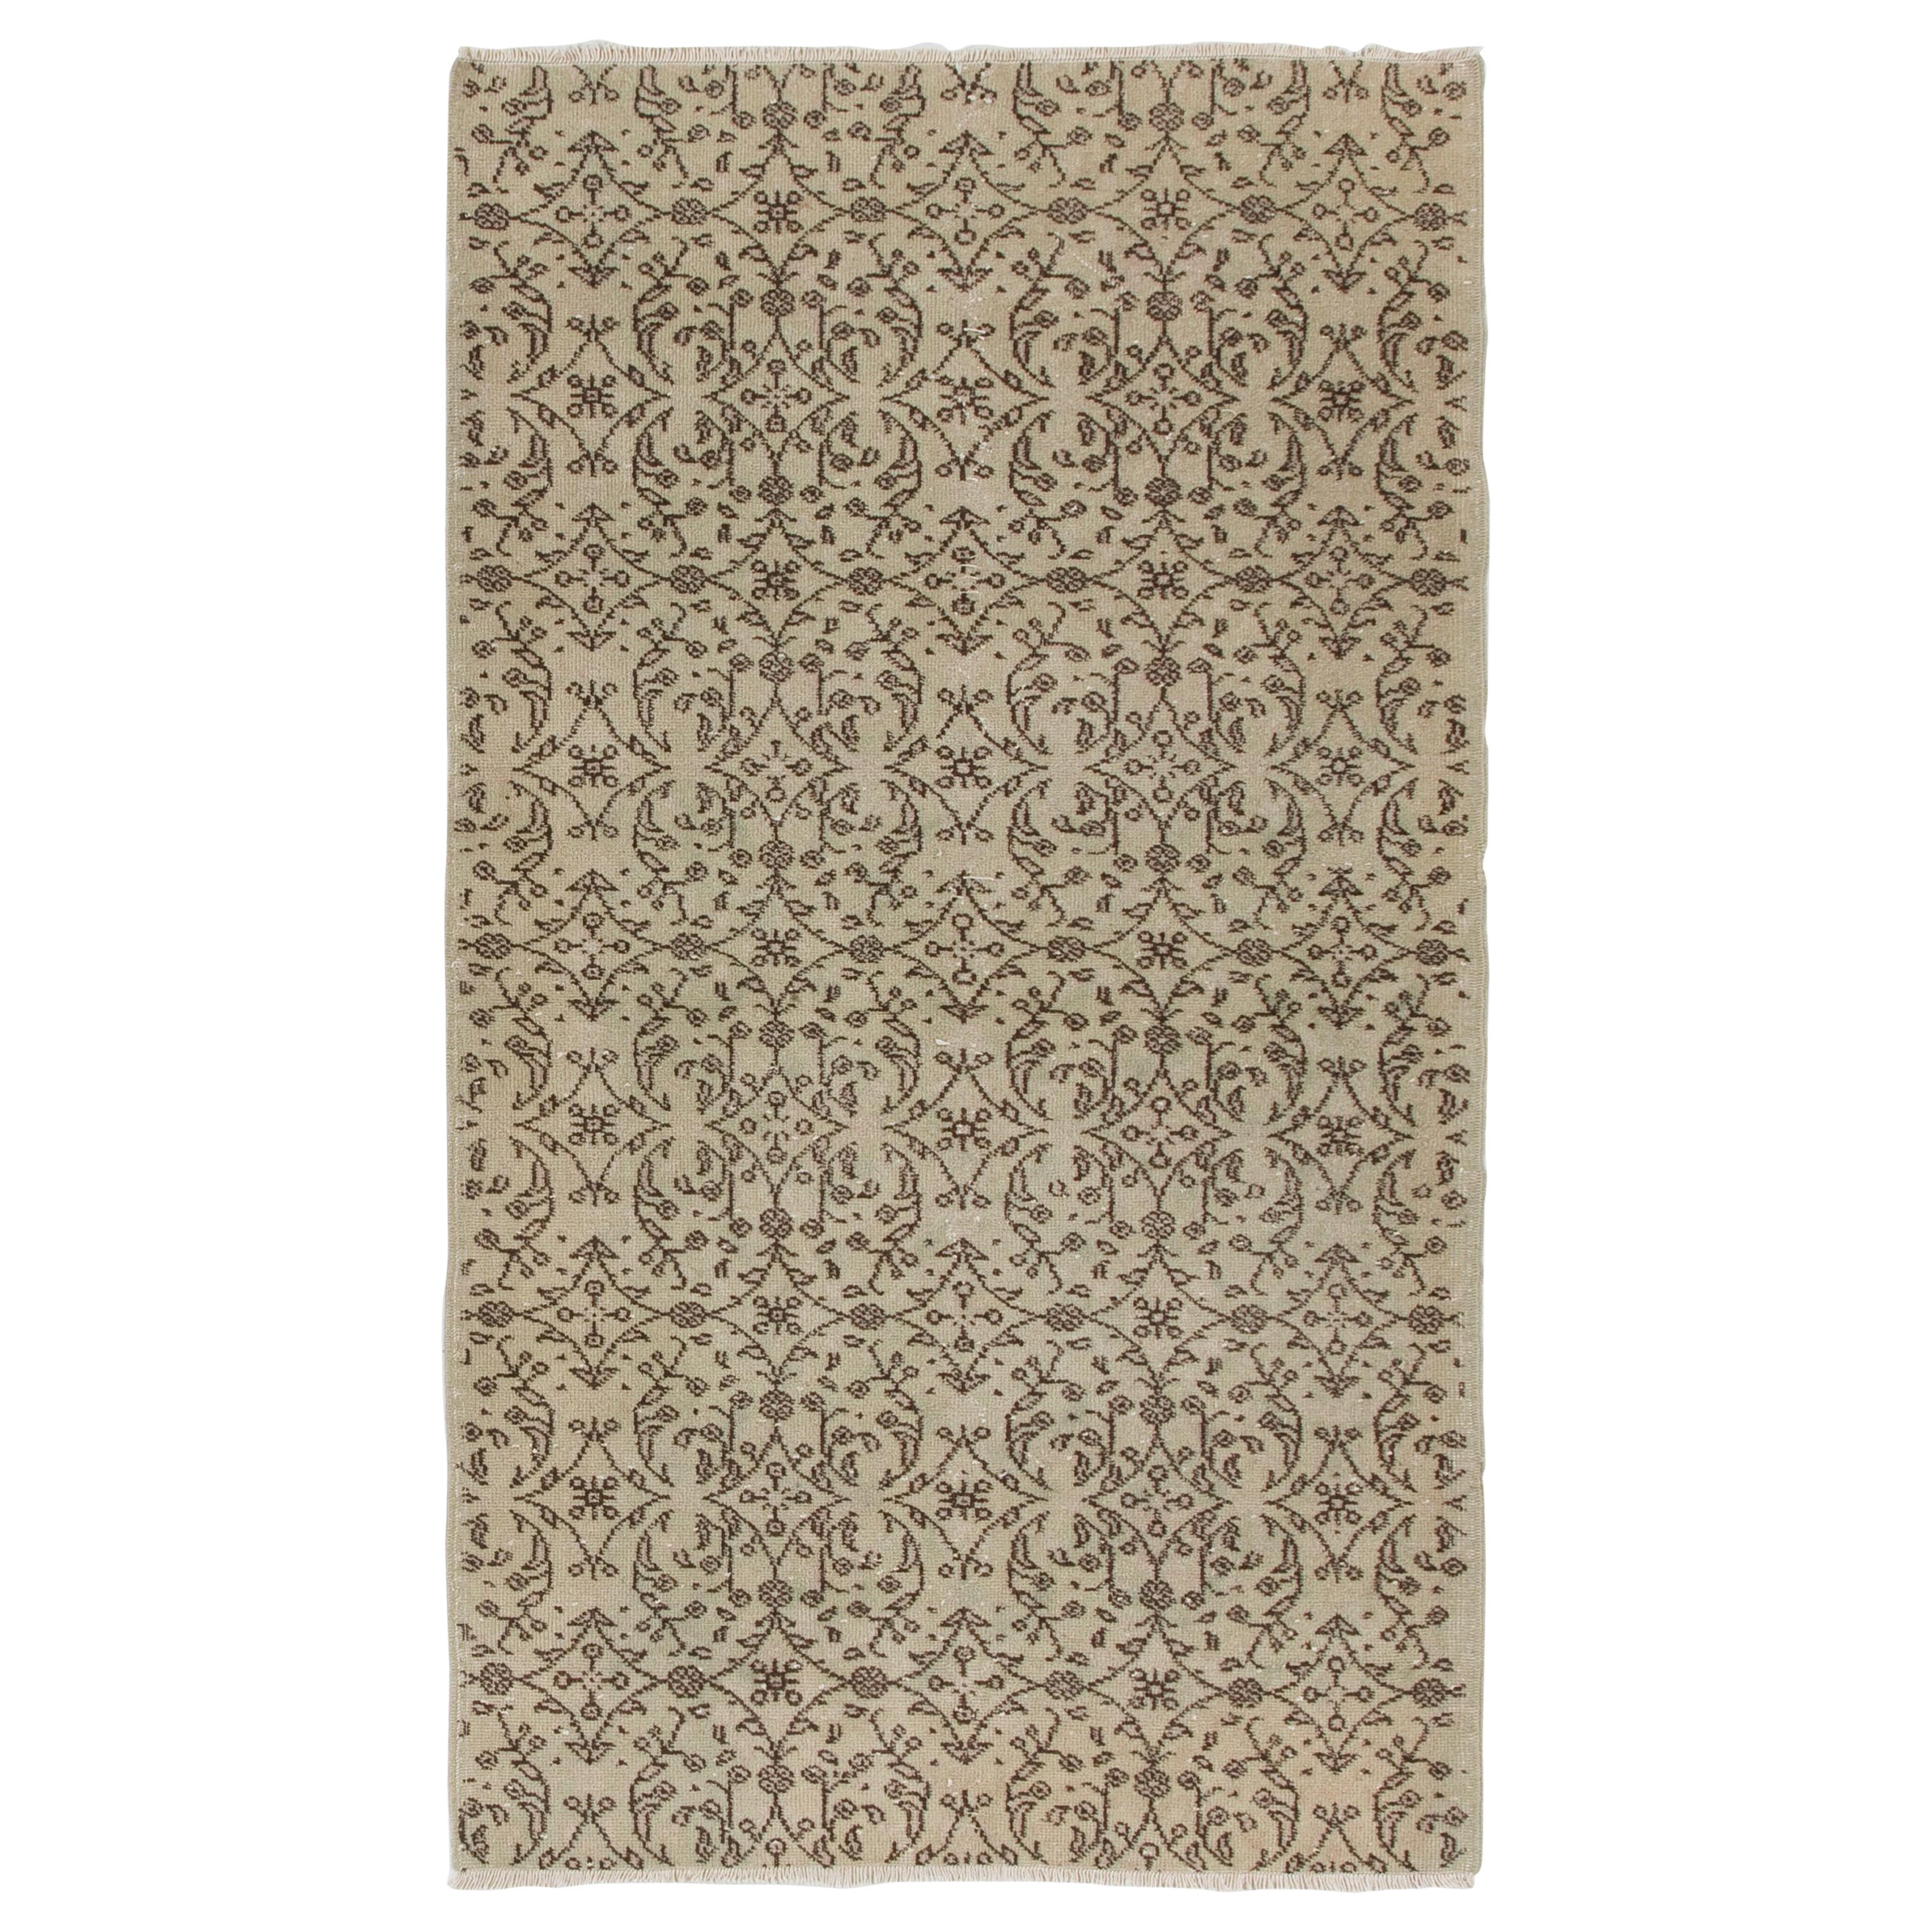 Hand-Knotted Vintage Floral Patterned Turkish Rug in Neutral Colors For Sale